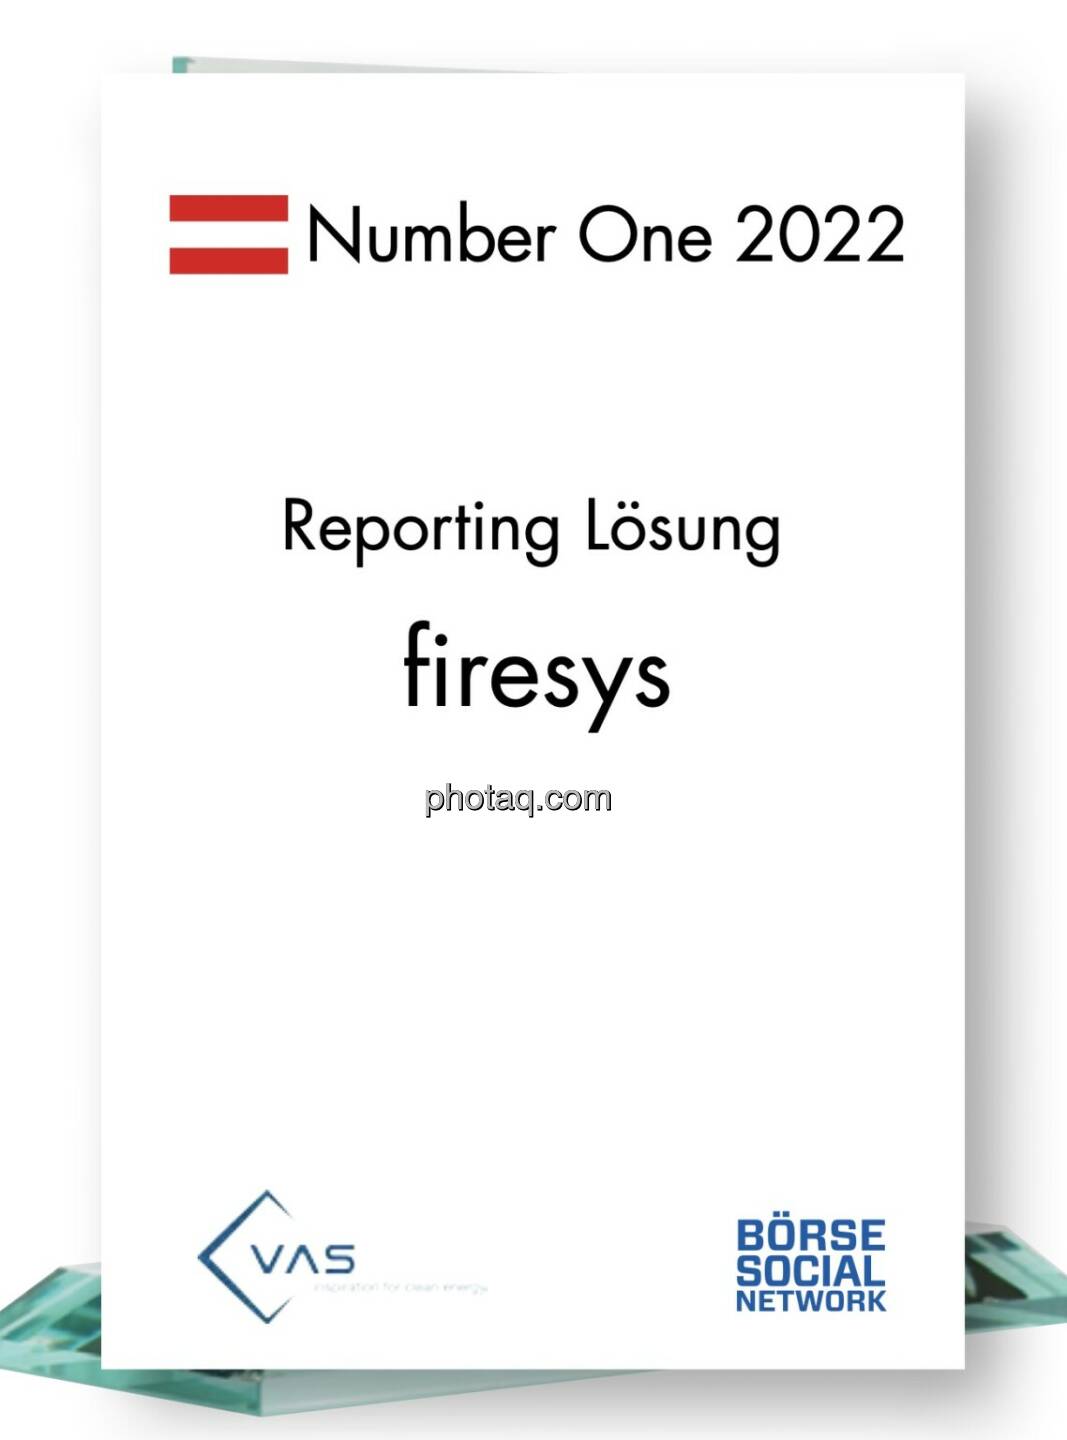 Number One Reporting Lösung: firesys